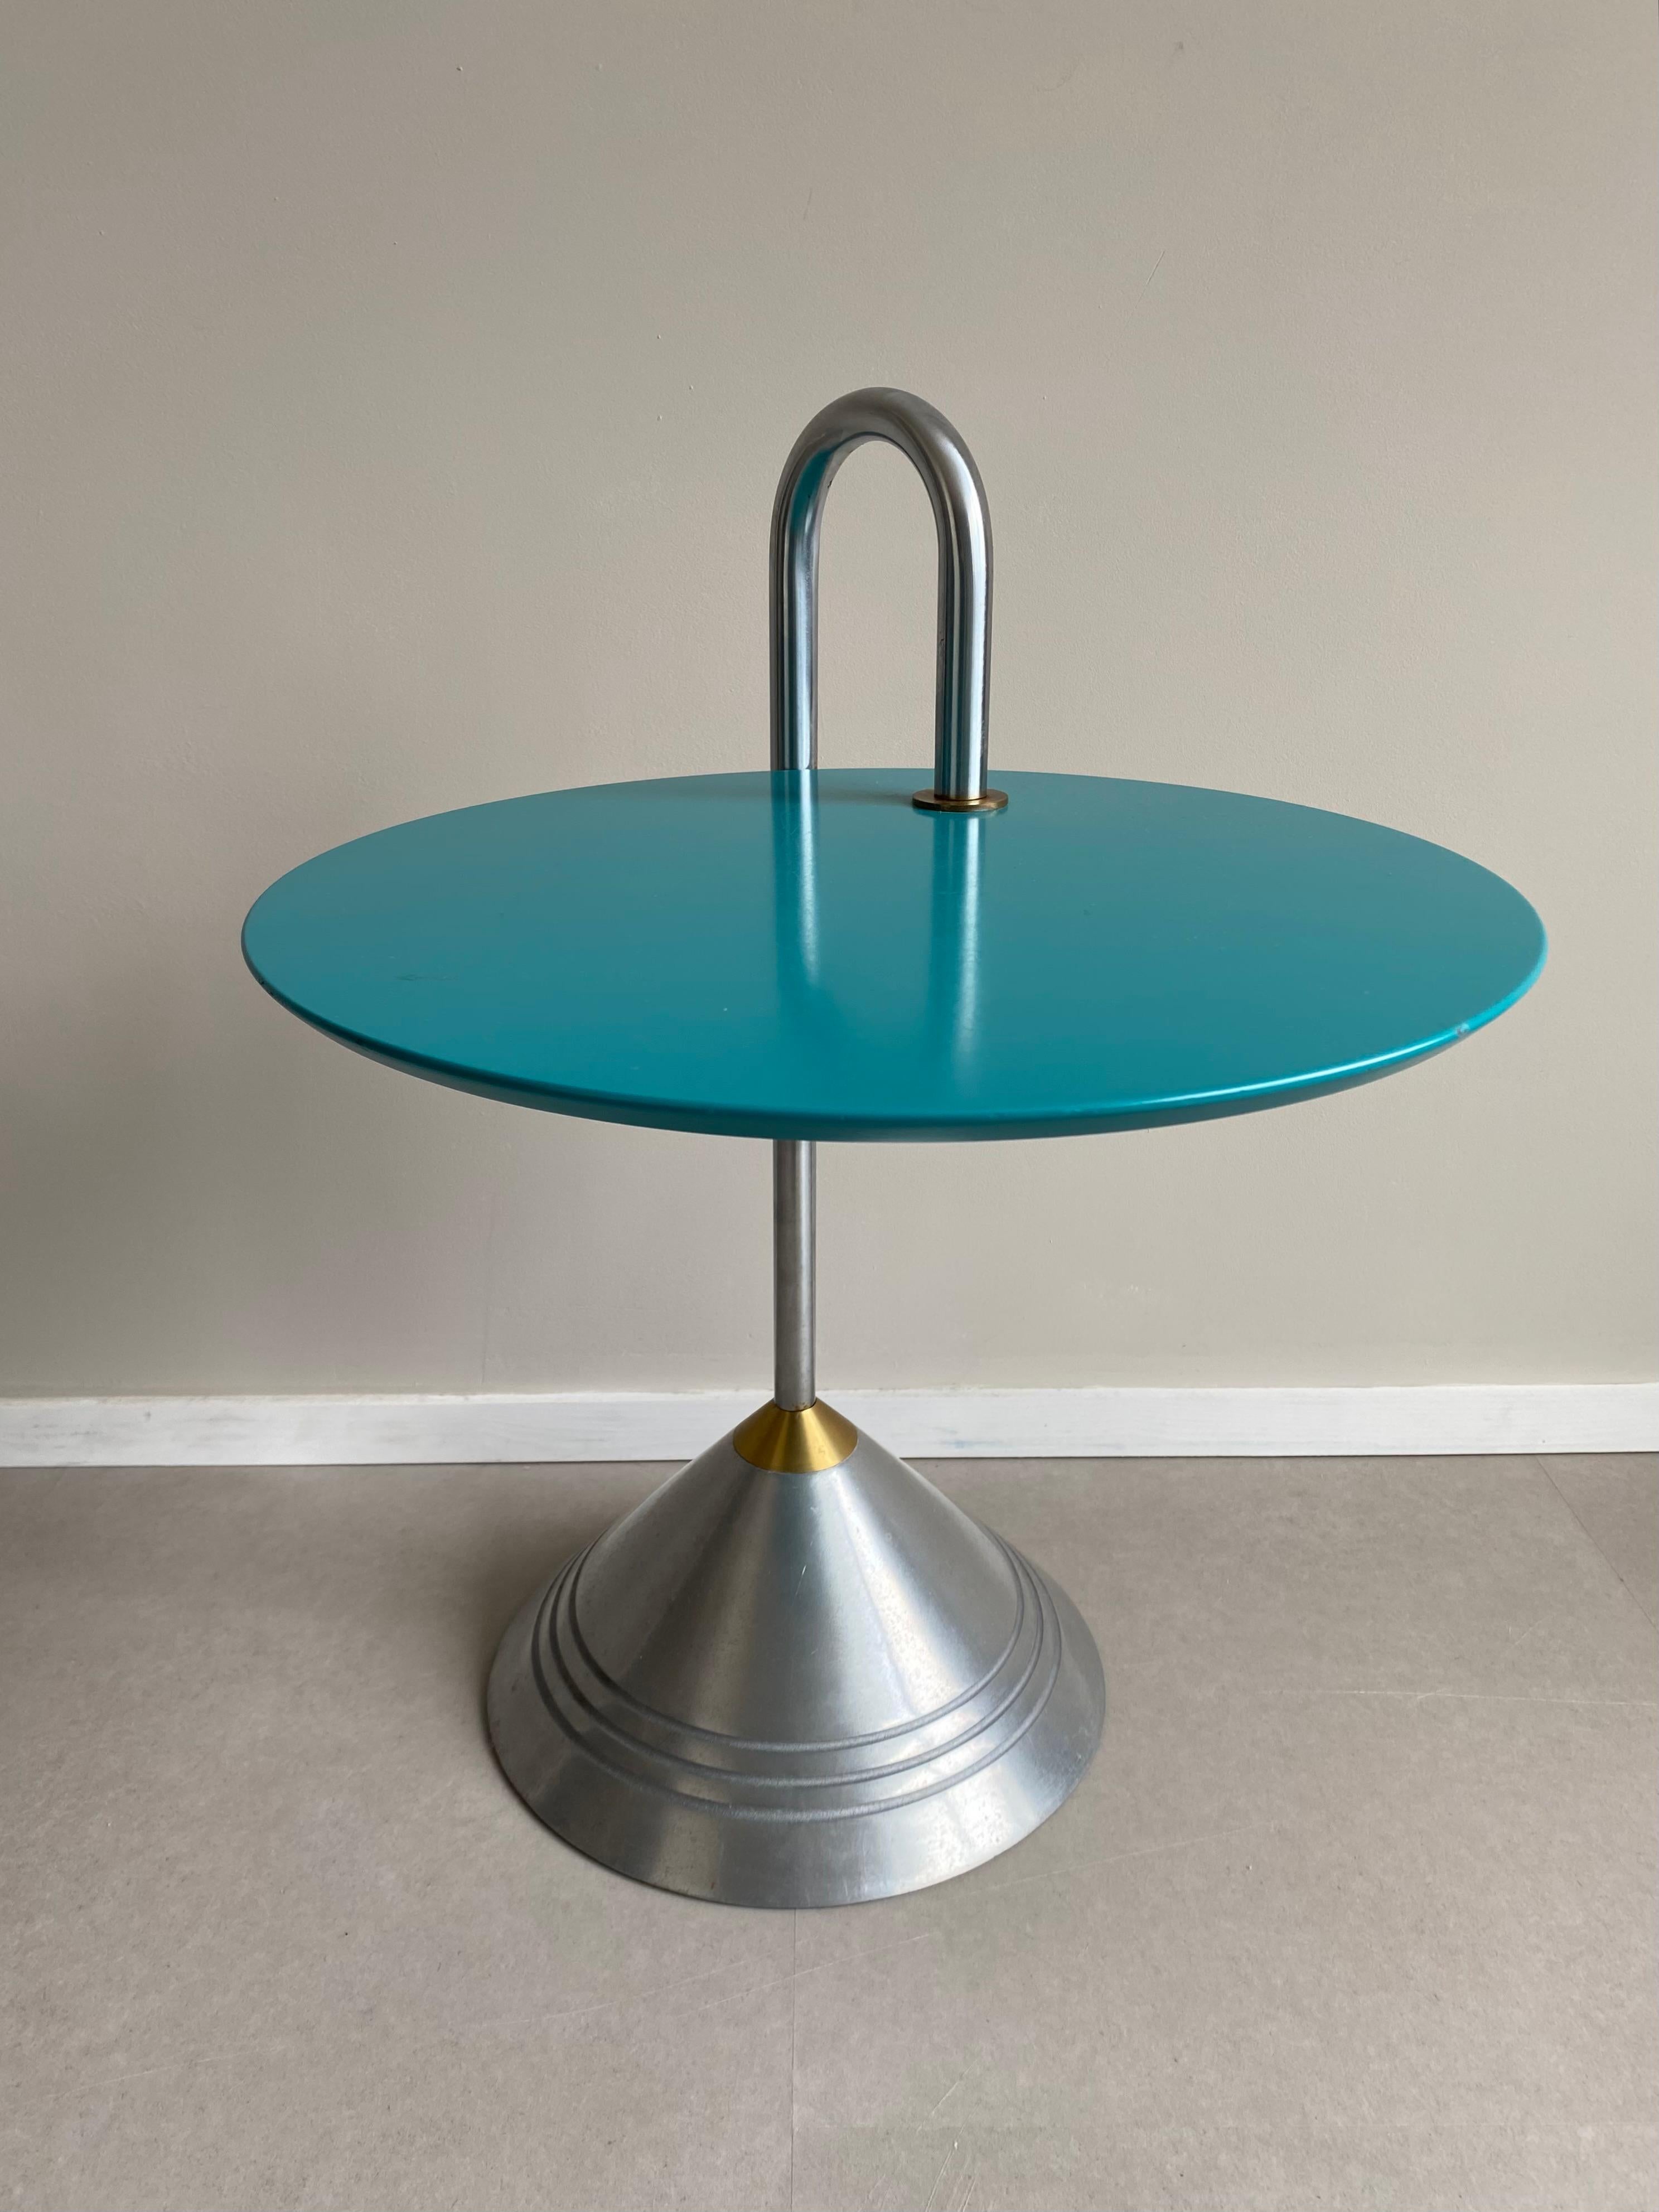 Stunning post-modern side table featuring a metal base (Cast Iron, Chrome and a small Brass part) and a laminated mint green table top. The table top is movable. This Memphis inspired piece remains in good condition with some light wear, consisting